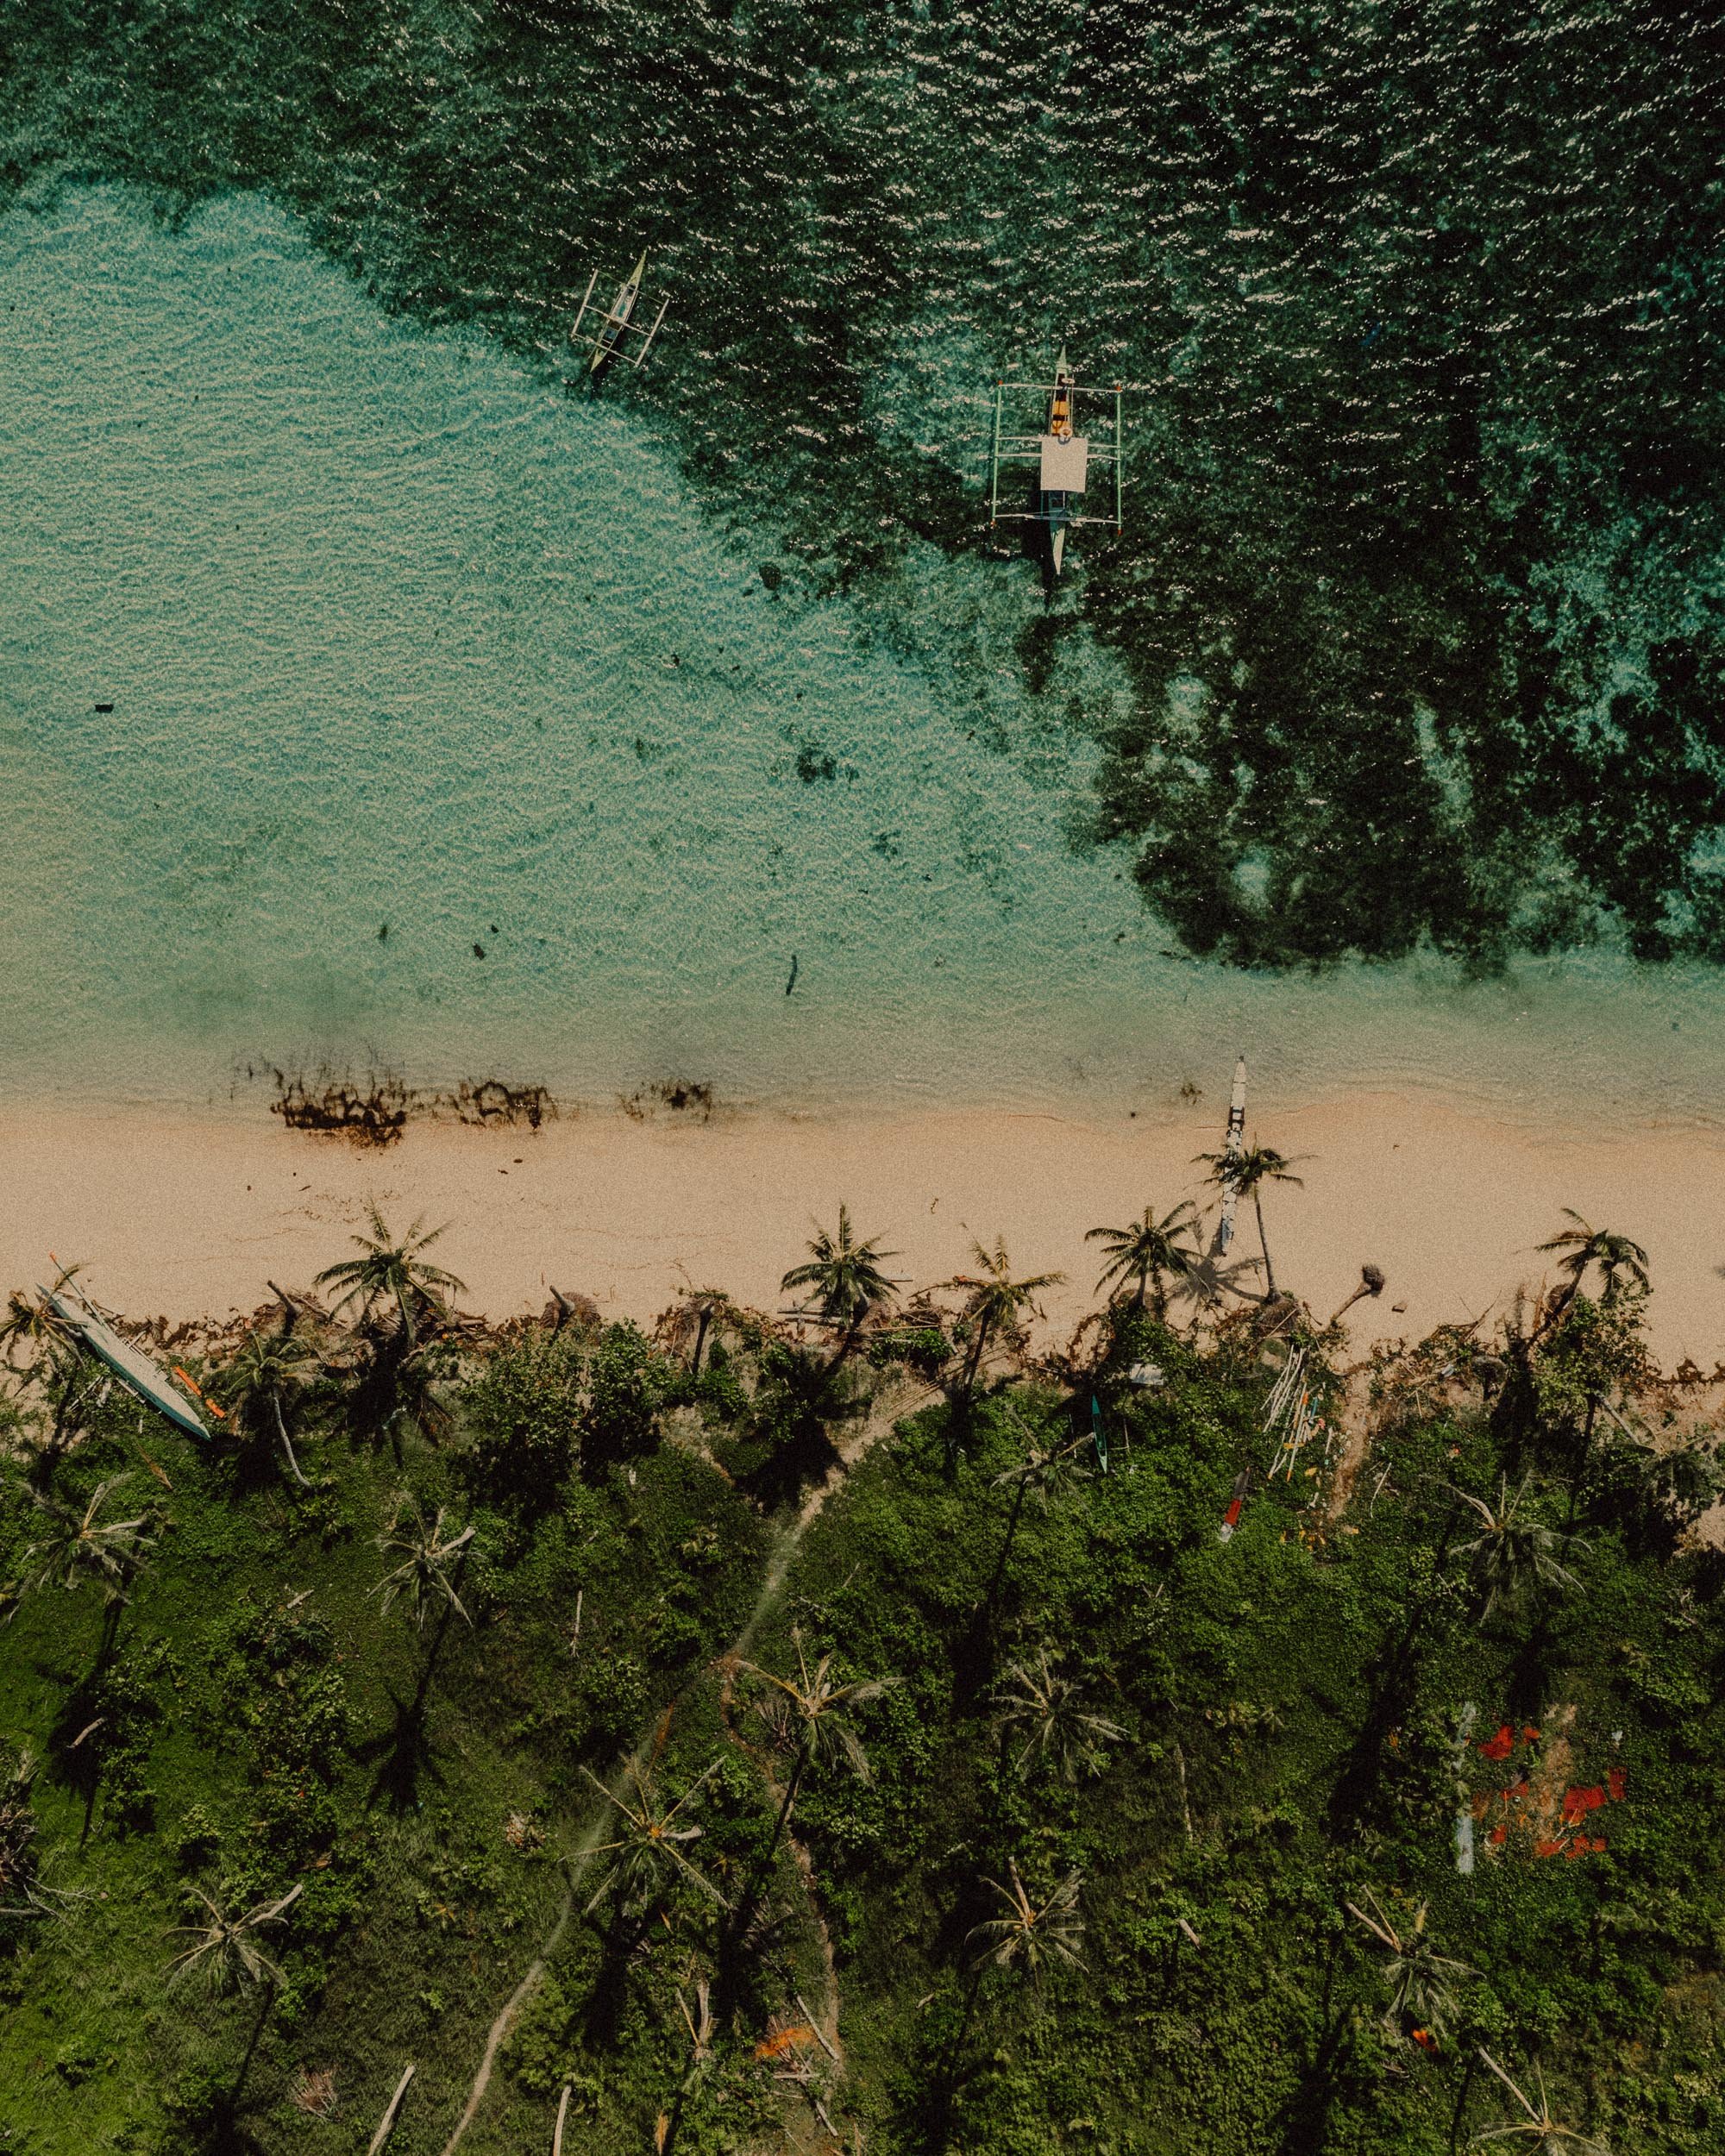 17-Siargao Drone Photography-A bird's-eye view aerial photo of General Luna, Siargao, Philippines, Southeast Asia, April 2022, Mavic 2 Pro, Hasselblad L1D-20c.jpg